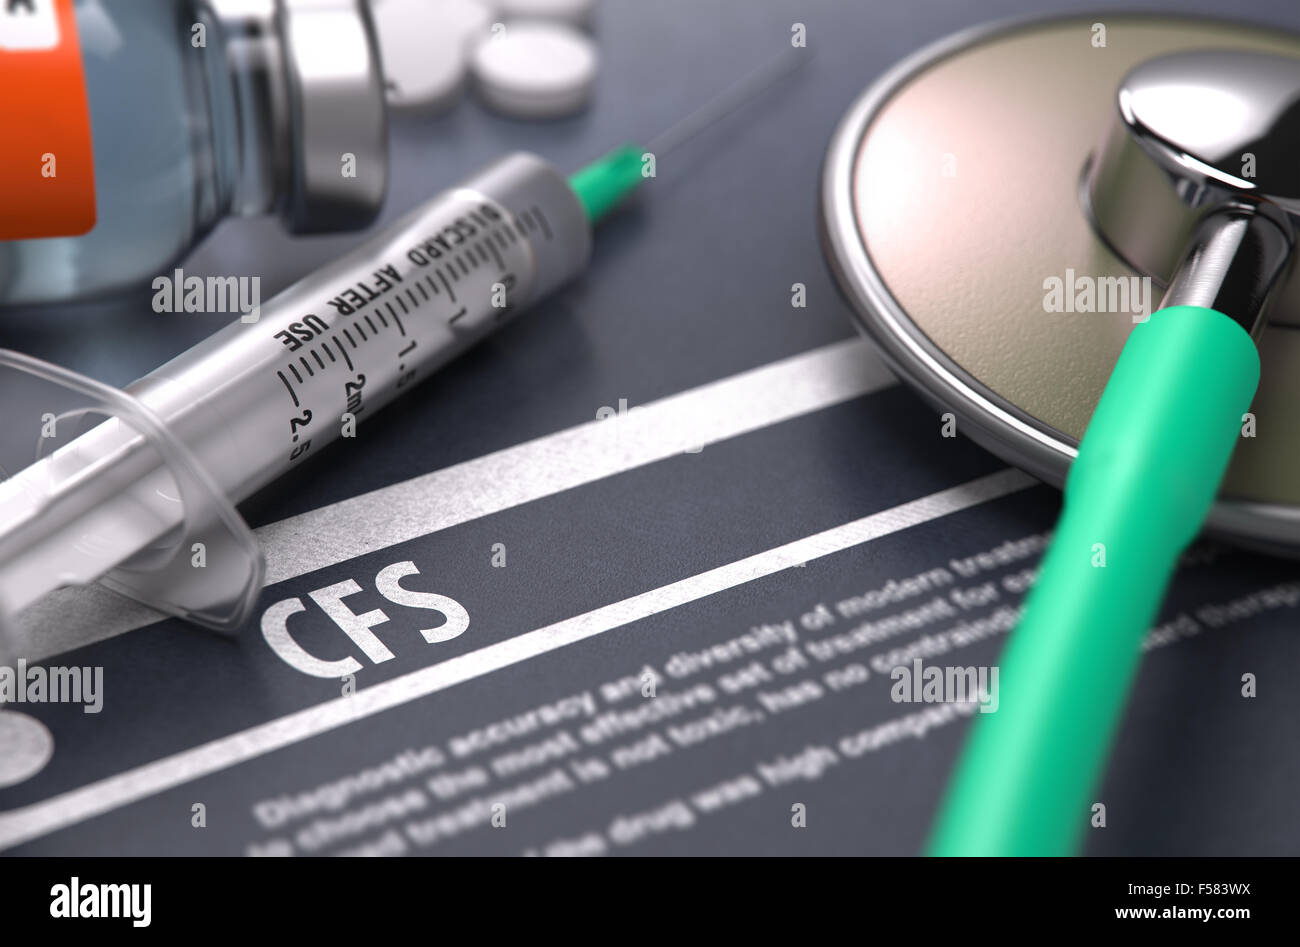 Diagnosis - CFS. Medical Concept with Blurred Text, Stethoscope, Pills and Syringe on Grey Background. Selective Focus. Stock Photo